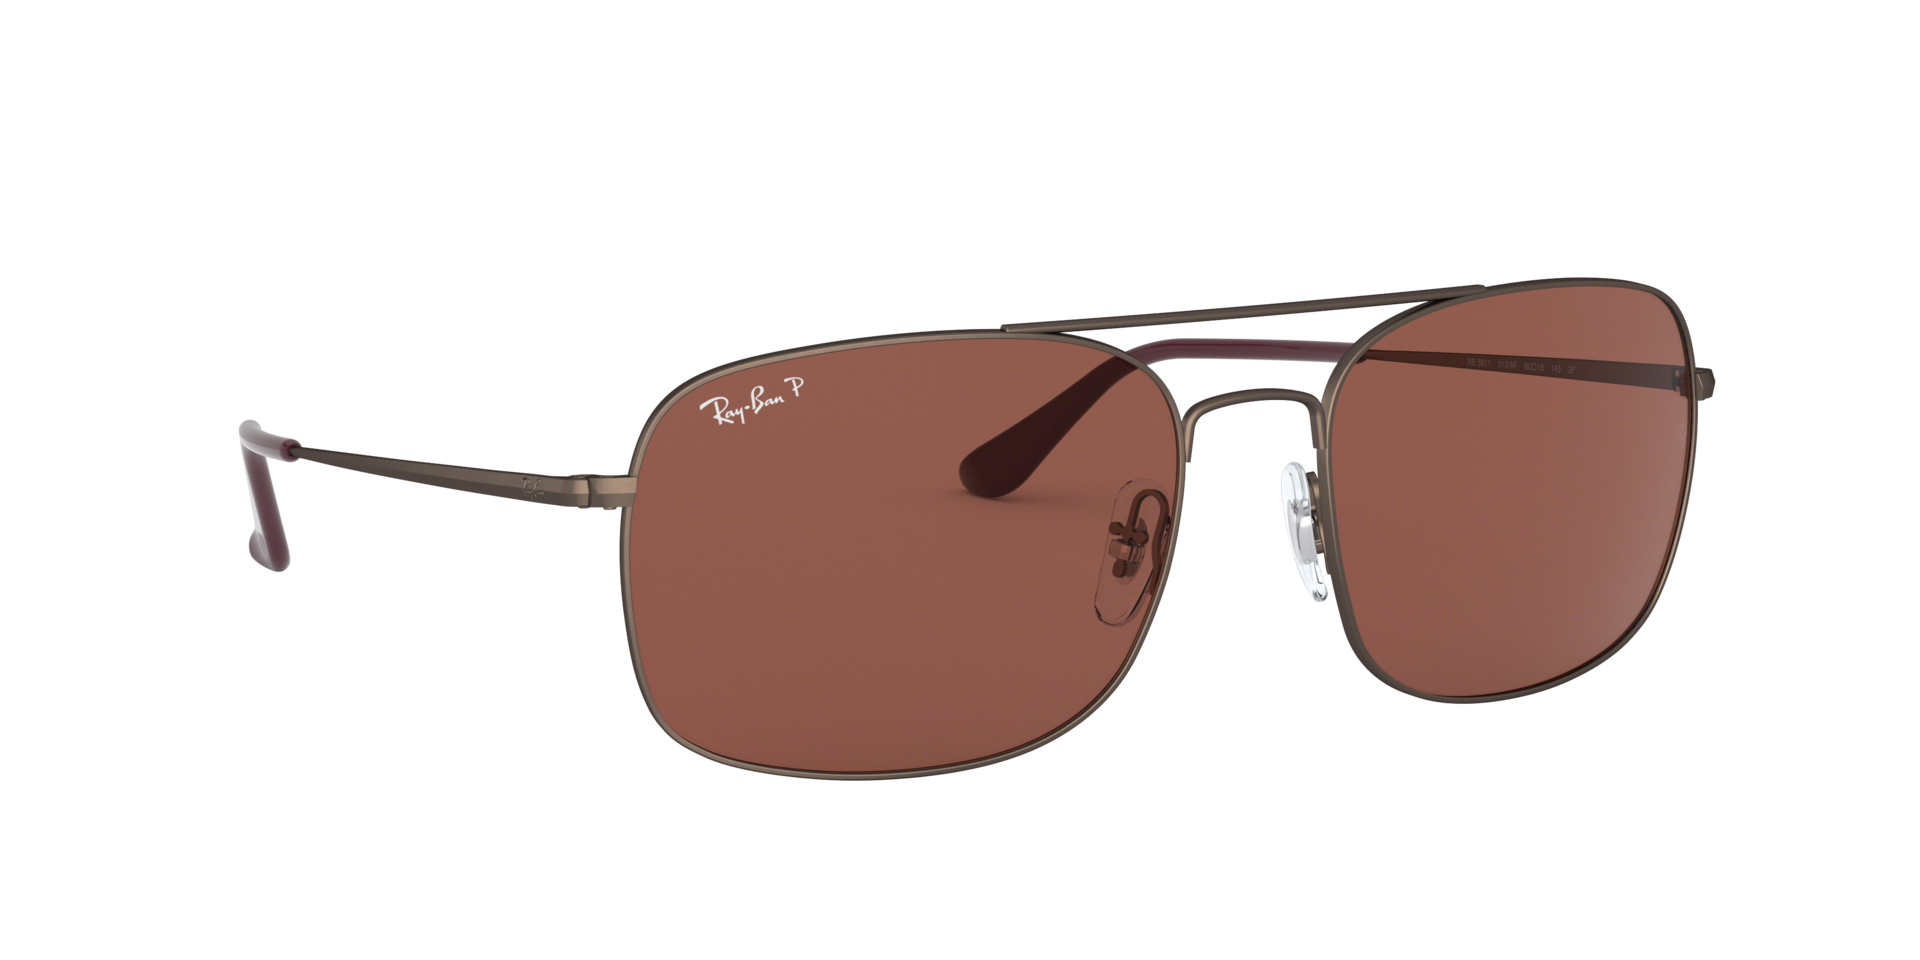 Buy Ray-Ban 0Rb3611 Sunglasses Online.